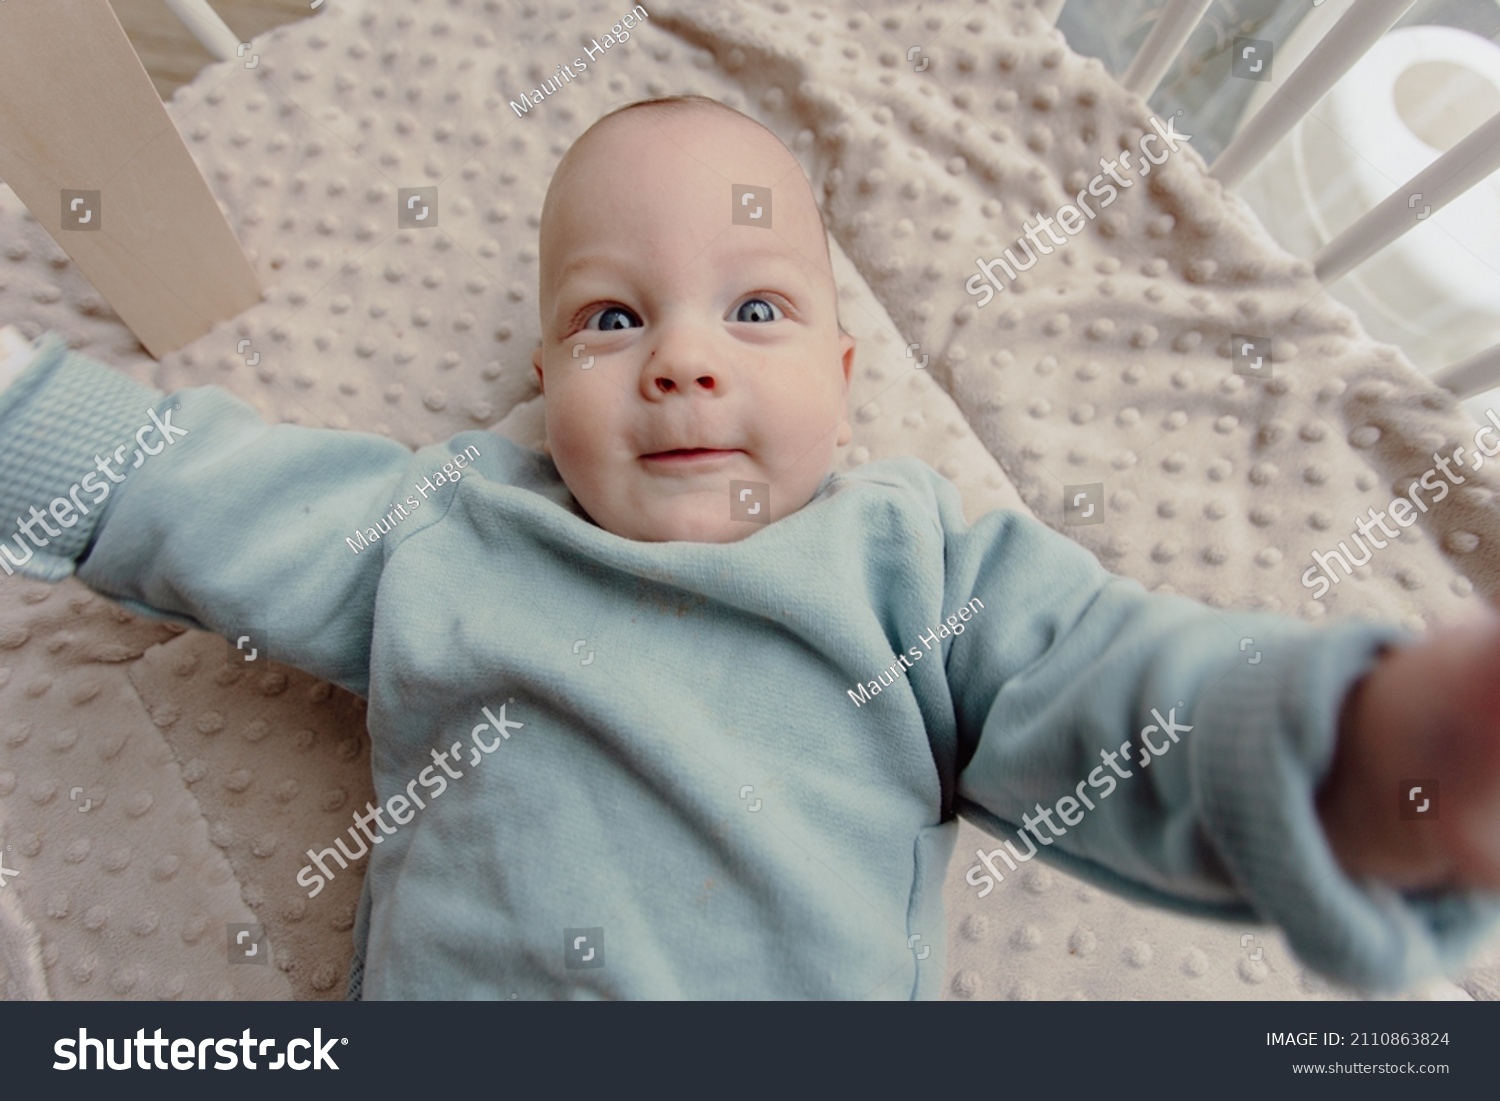 Adorable four month old baby boy laying in play pen looking around smiling. Wears a blue sweater and has blue eyes. #2110863824